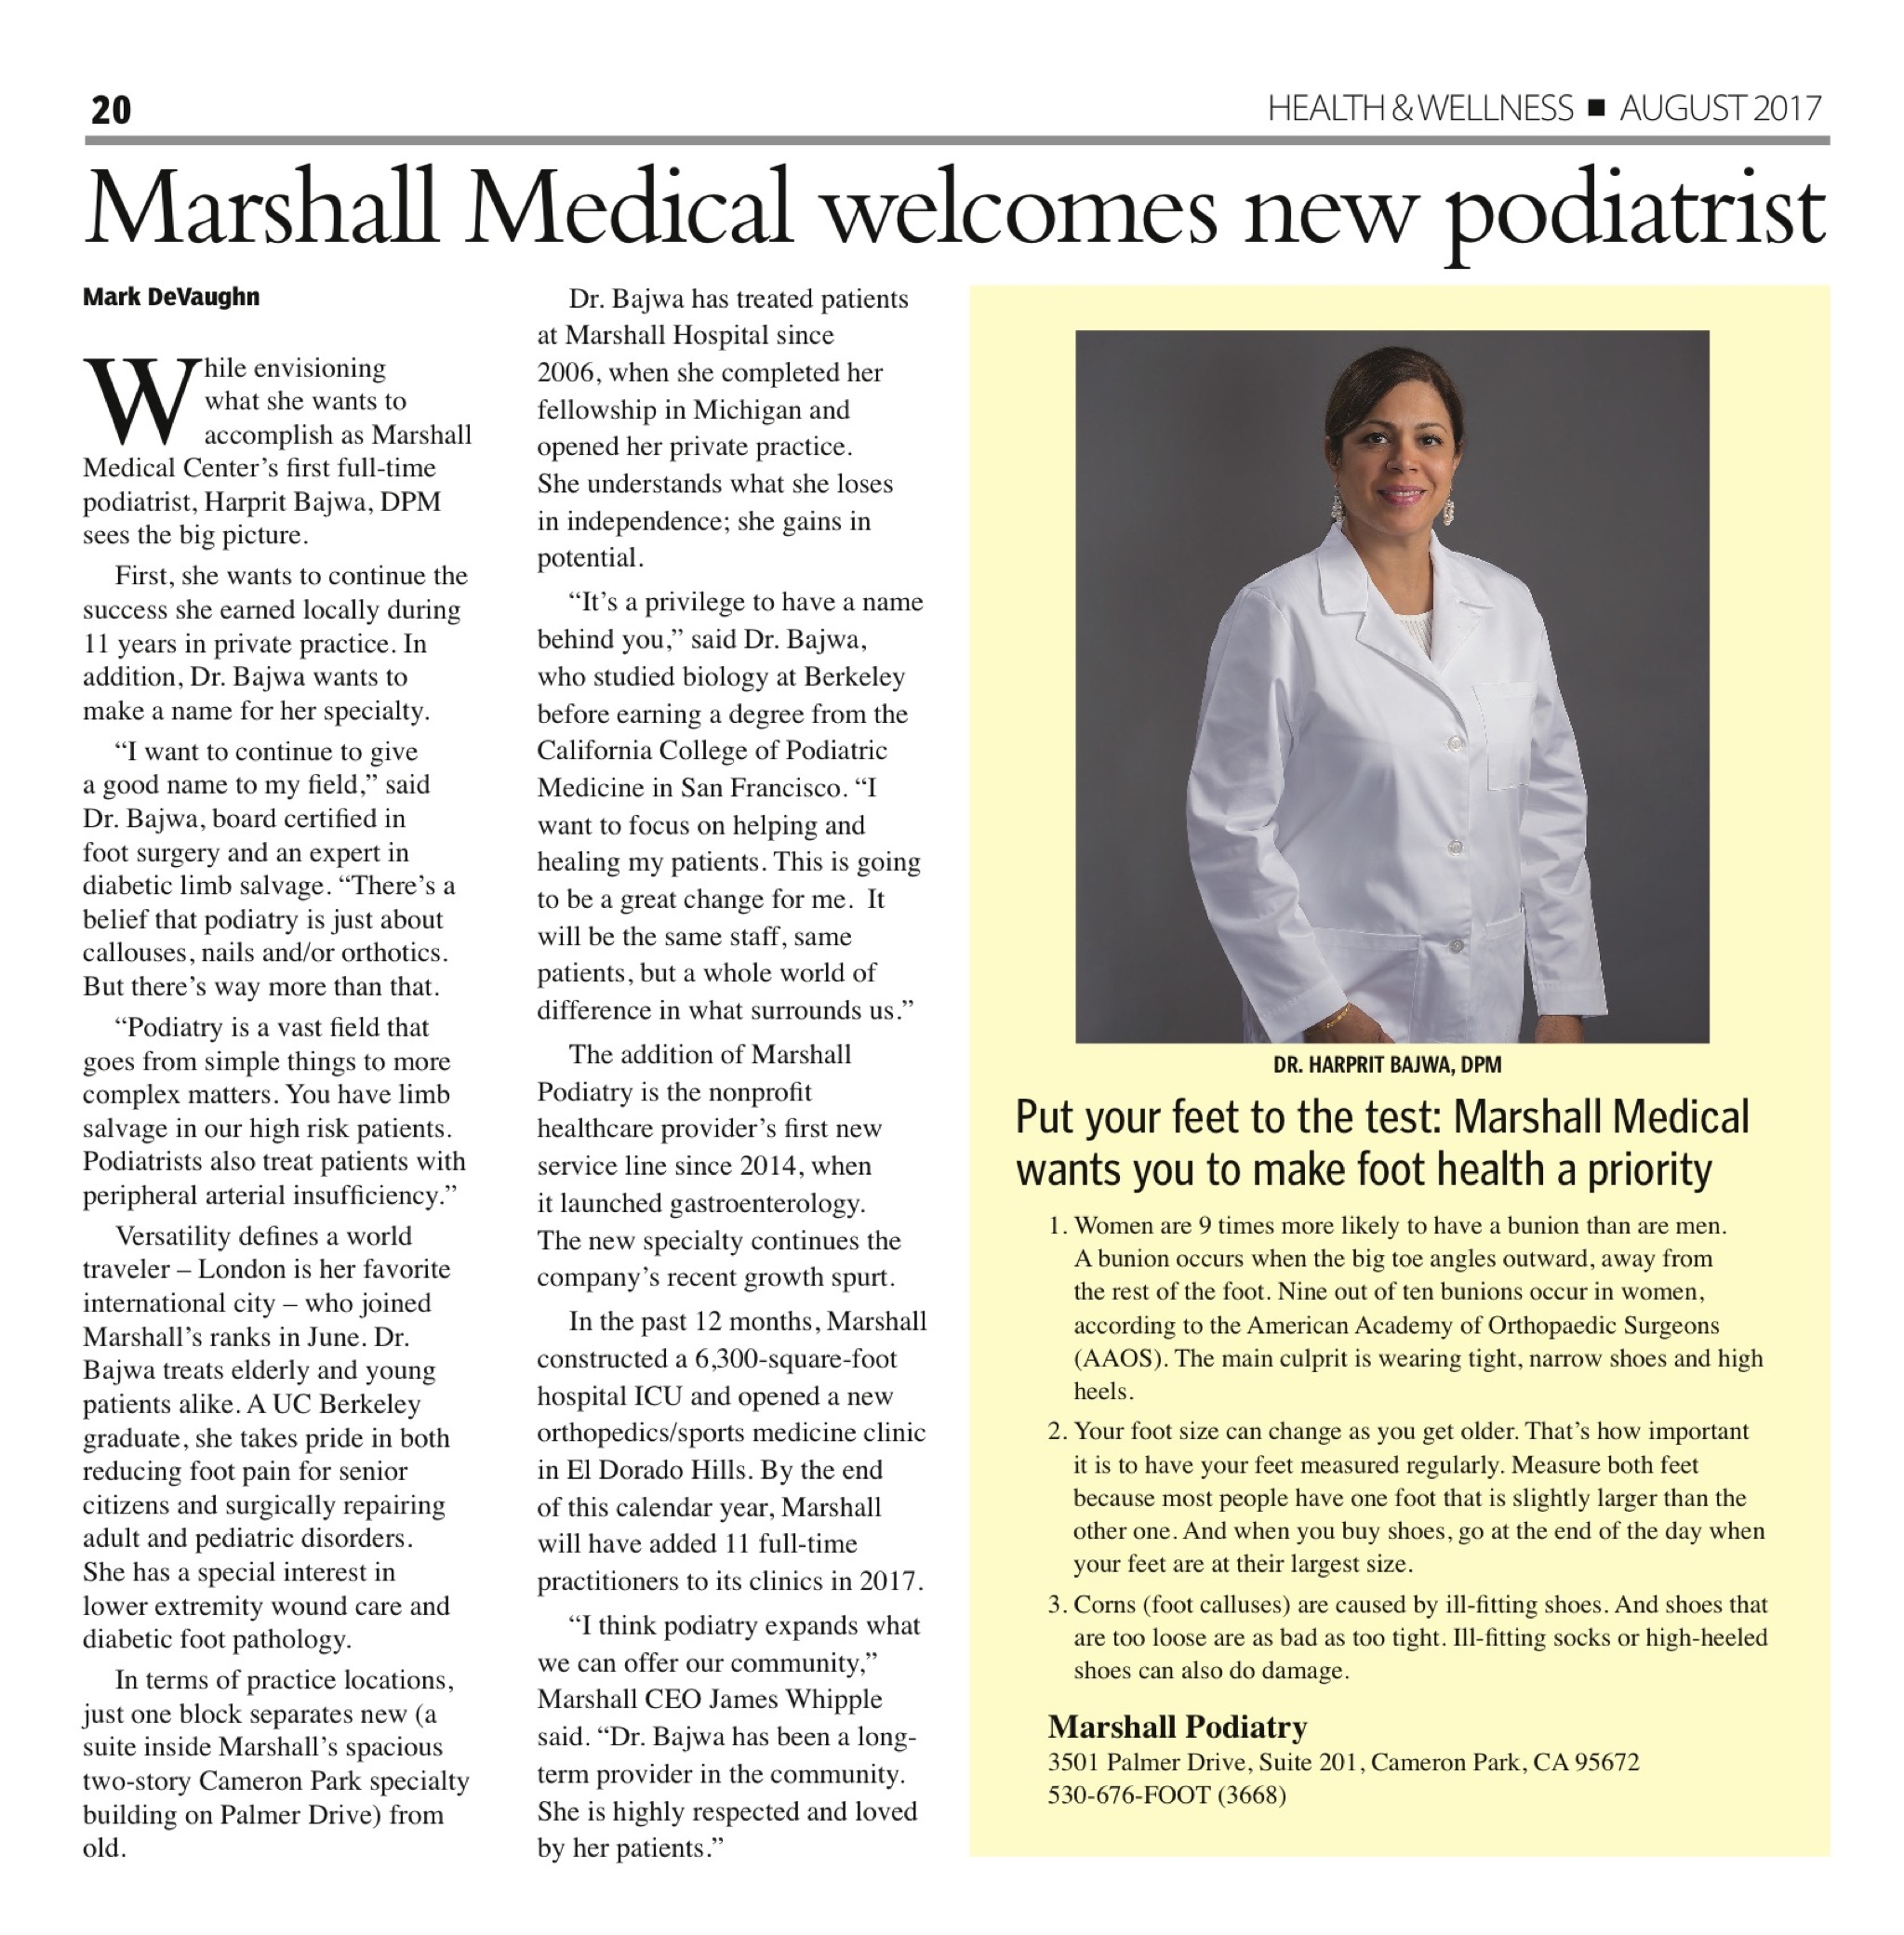 Marshall Medical Welcomes New Podiatrist Newspaper Article